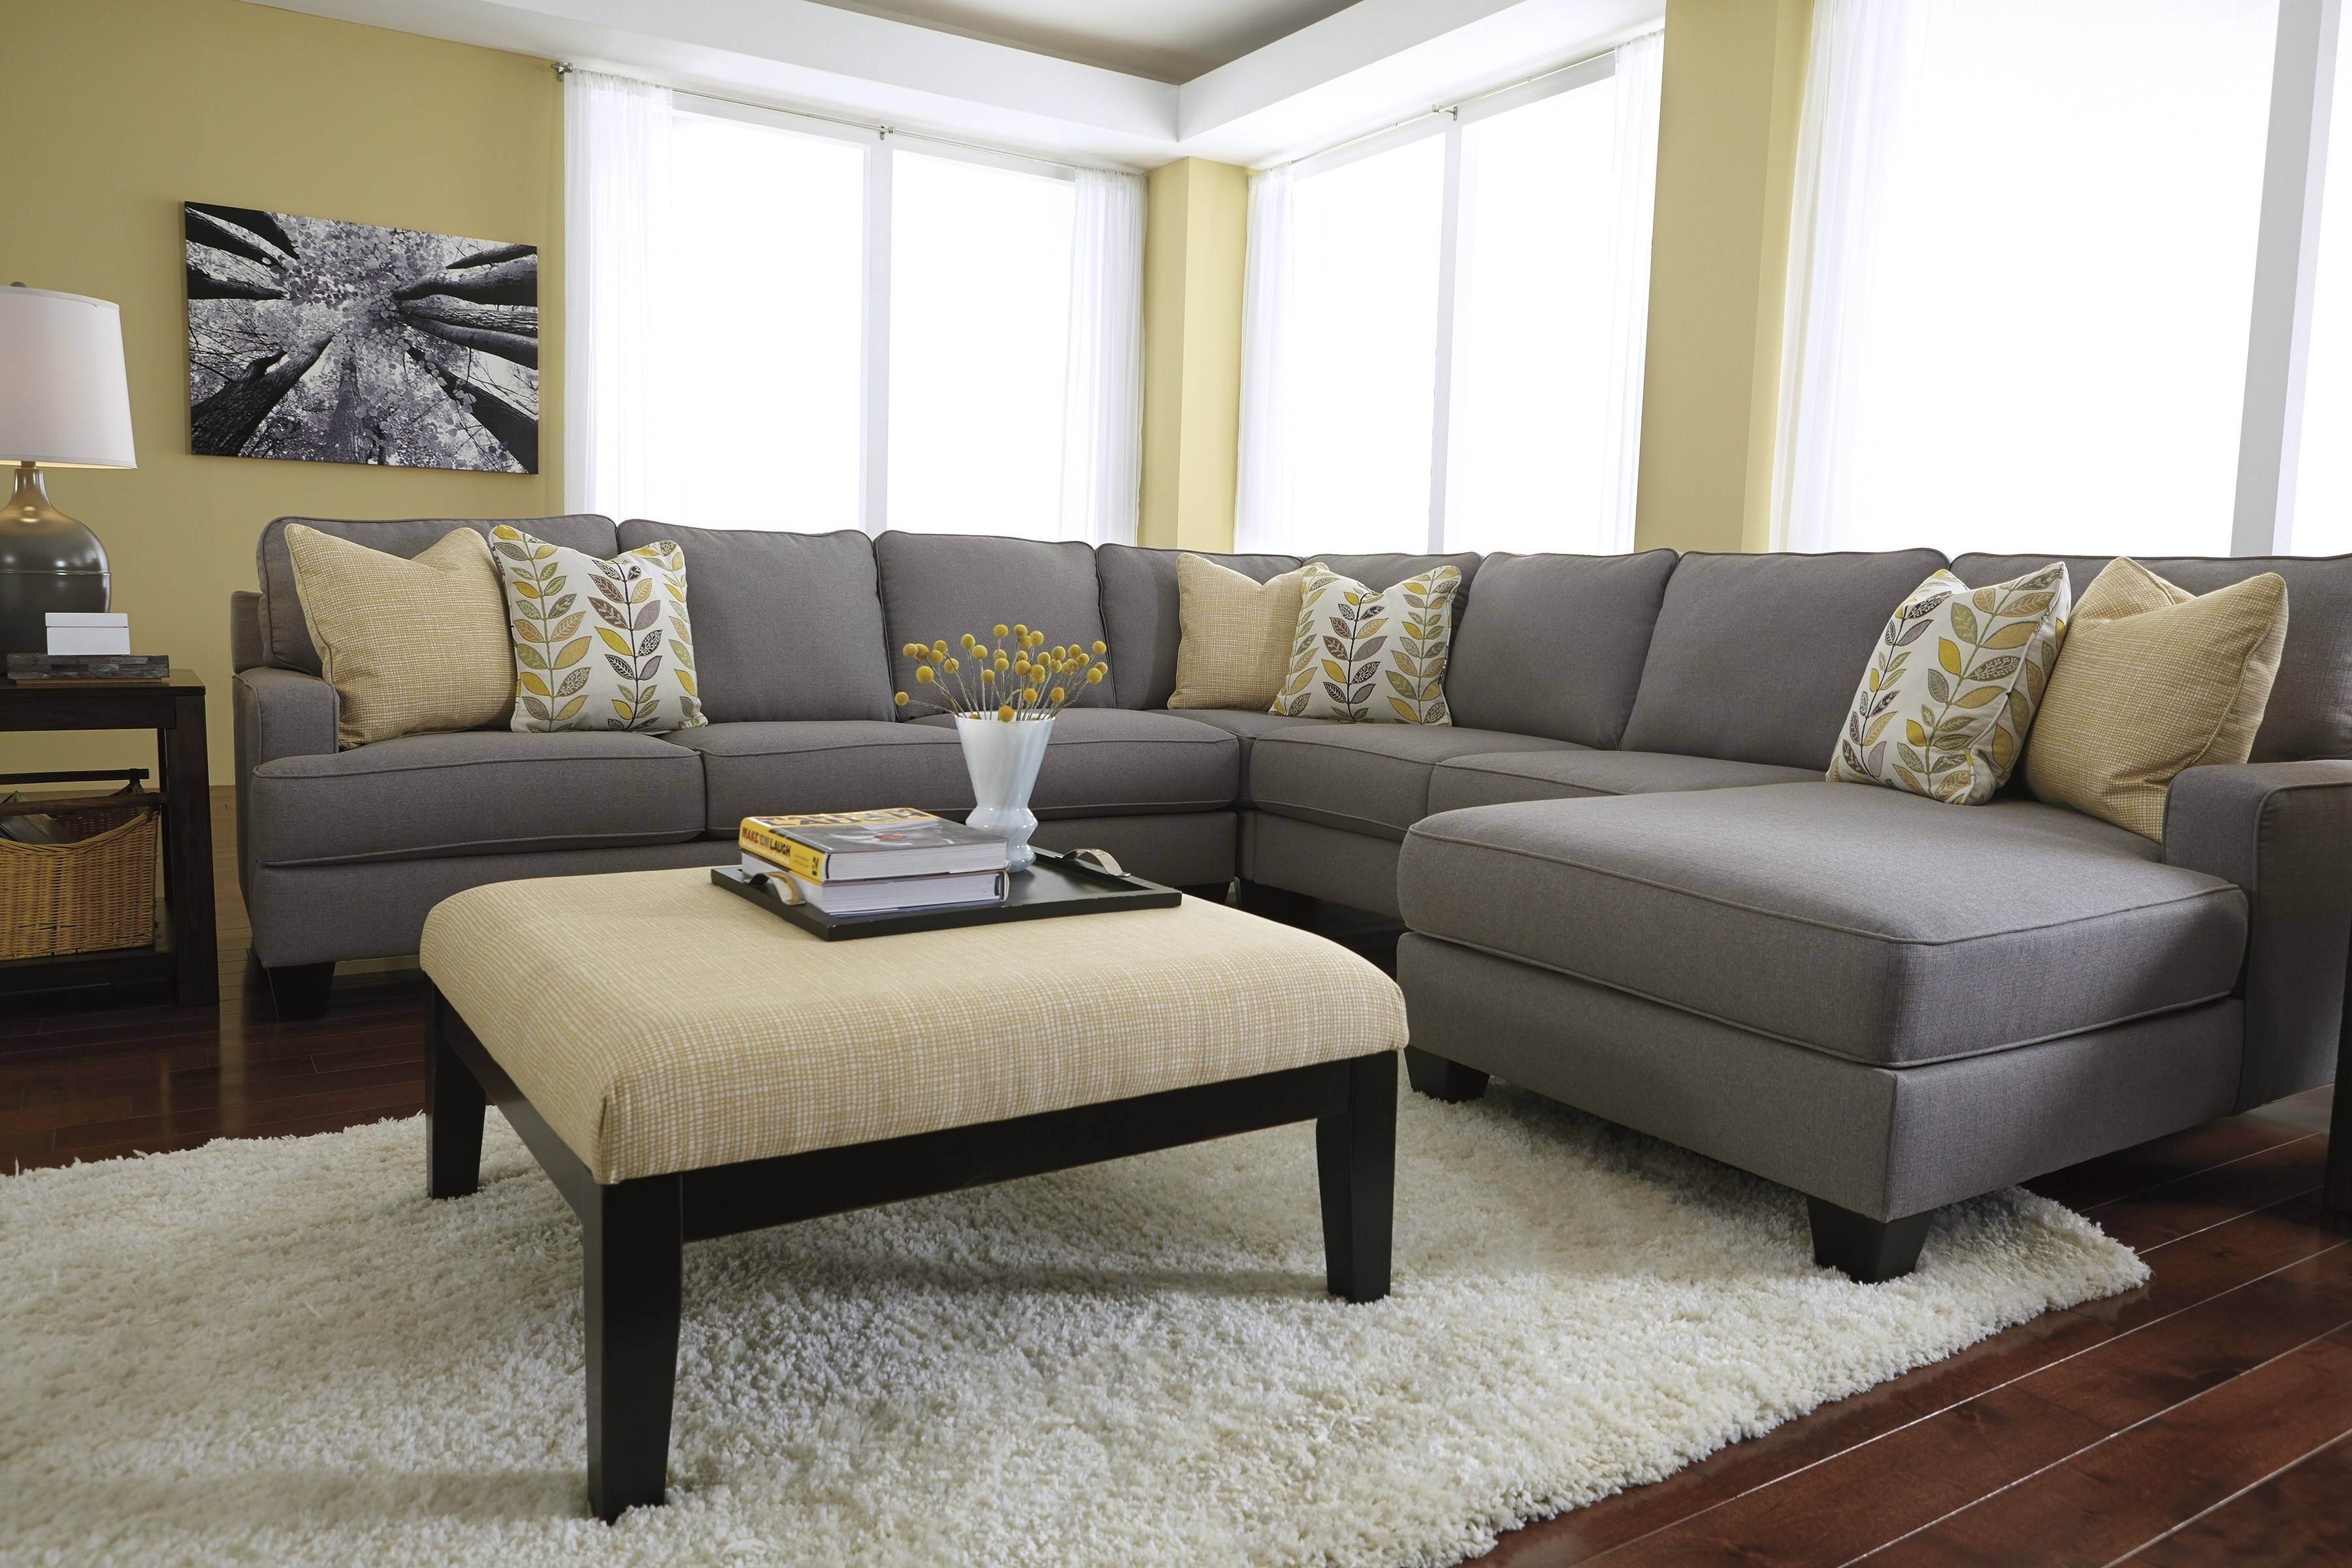 Huge Sectional Sofa.huge Sectional Couches And Pit Sectional For Pertaining To Oversized Sectional Sofa (Photo 12 of 30)